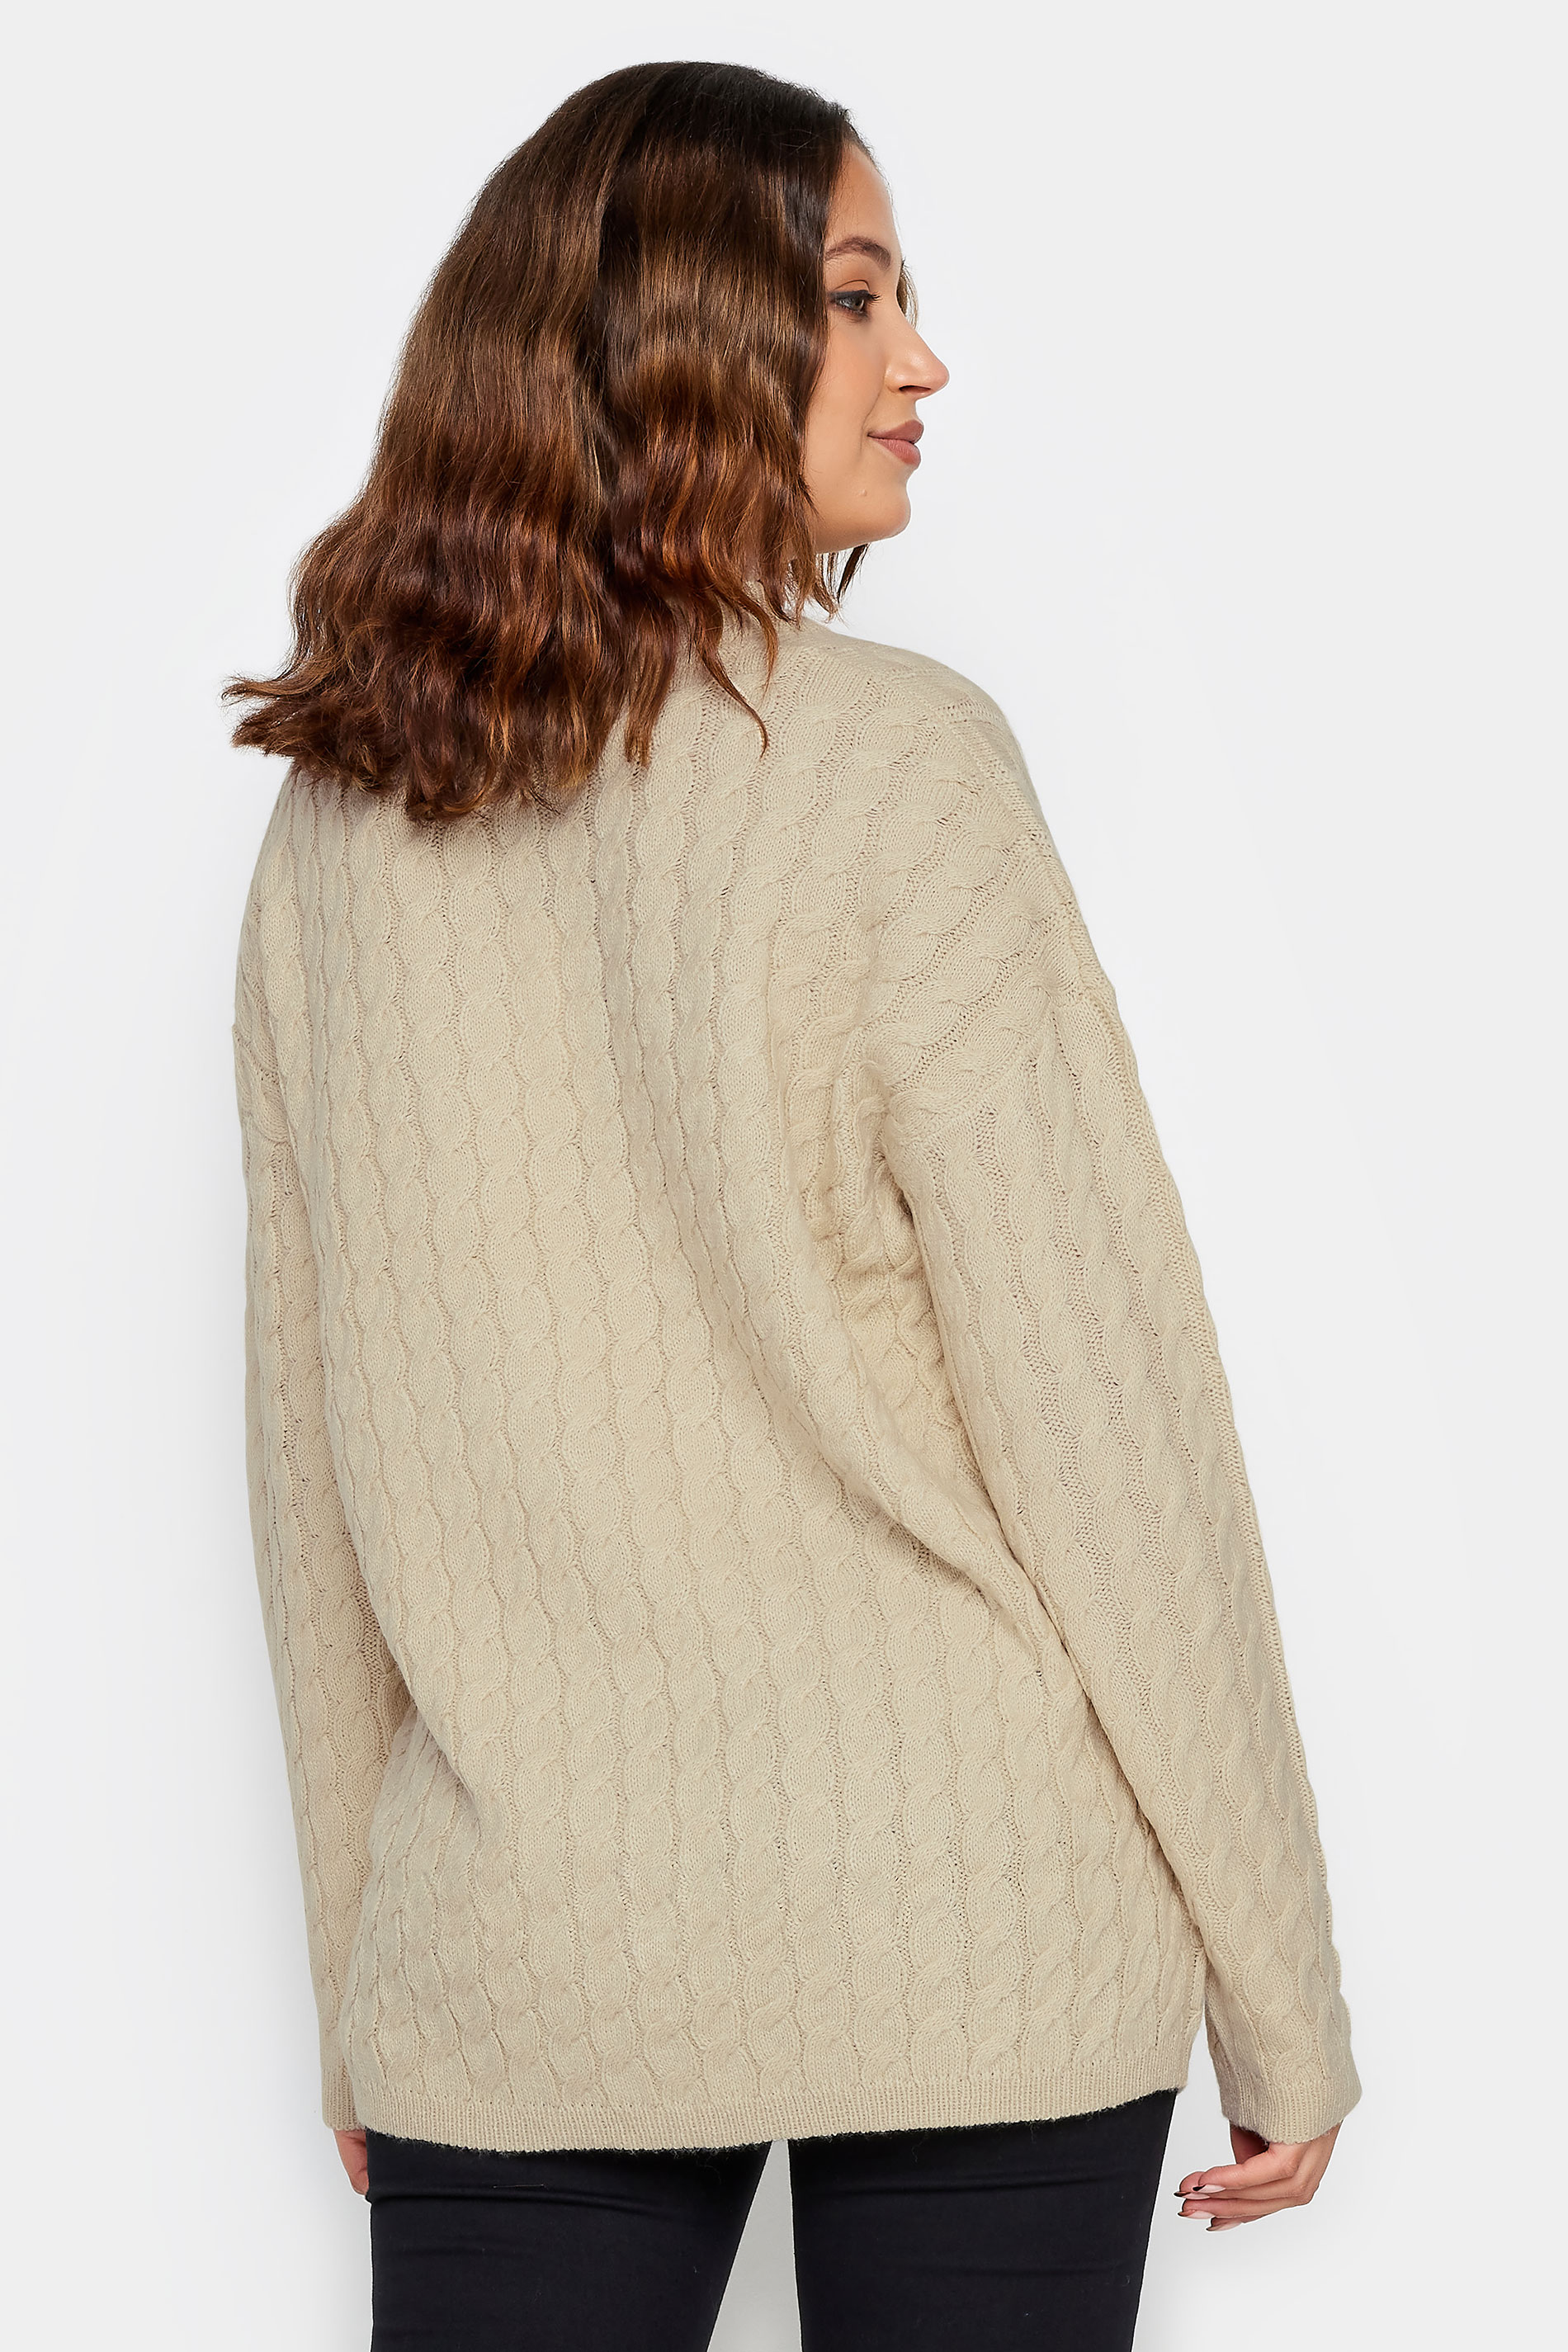 LTS Tall Beige Brown Cable Knit Jumper | Long Tall Sally  3